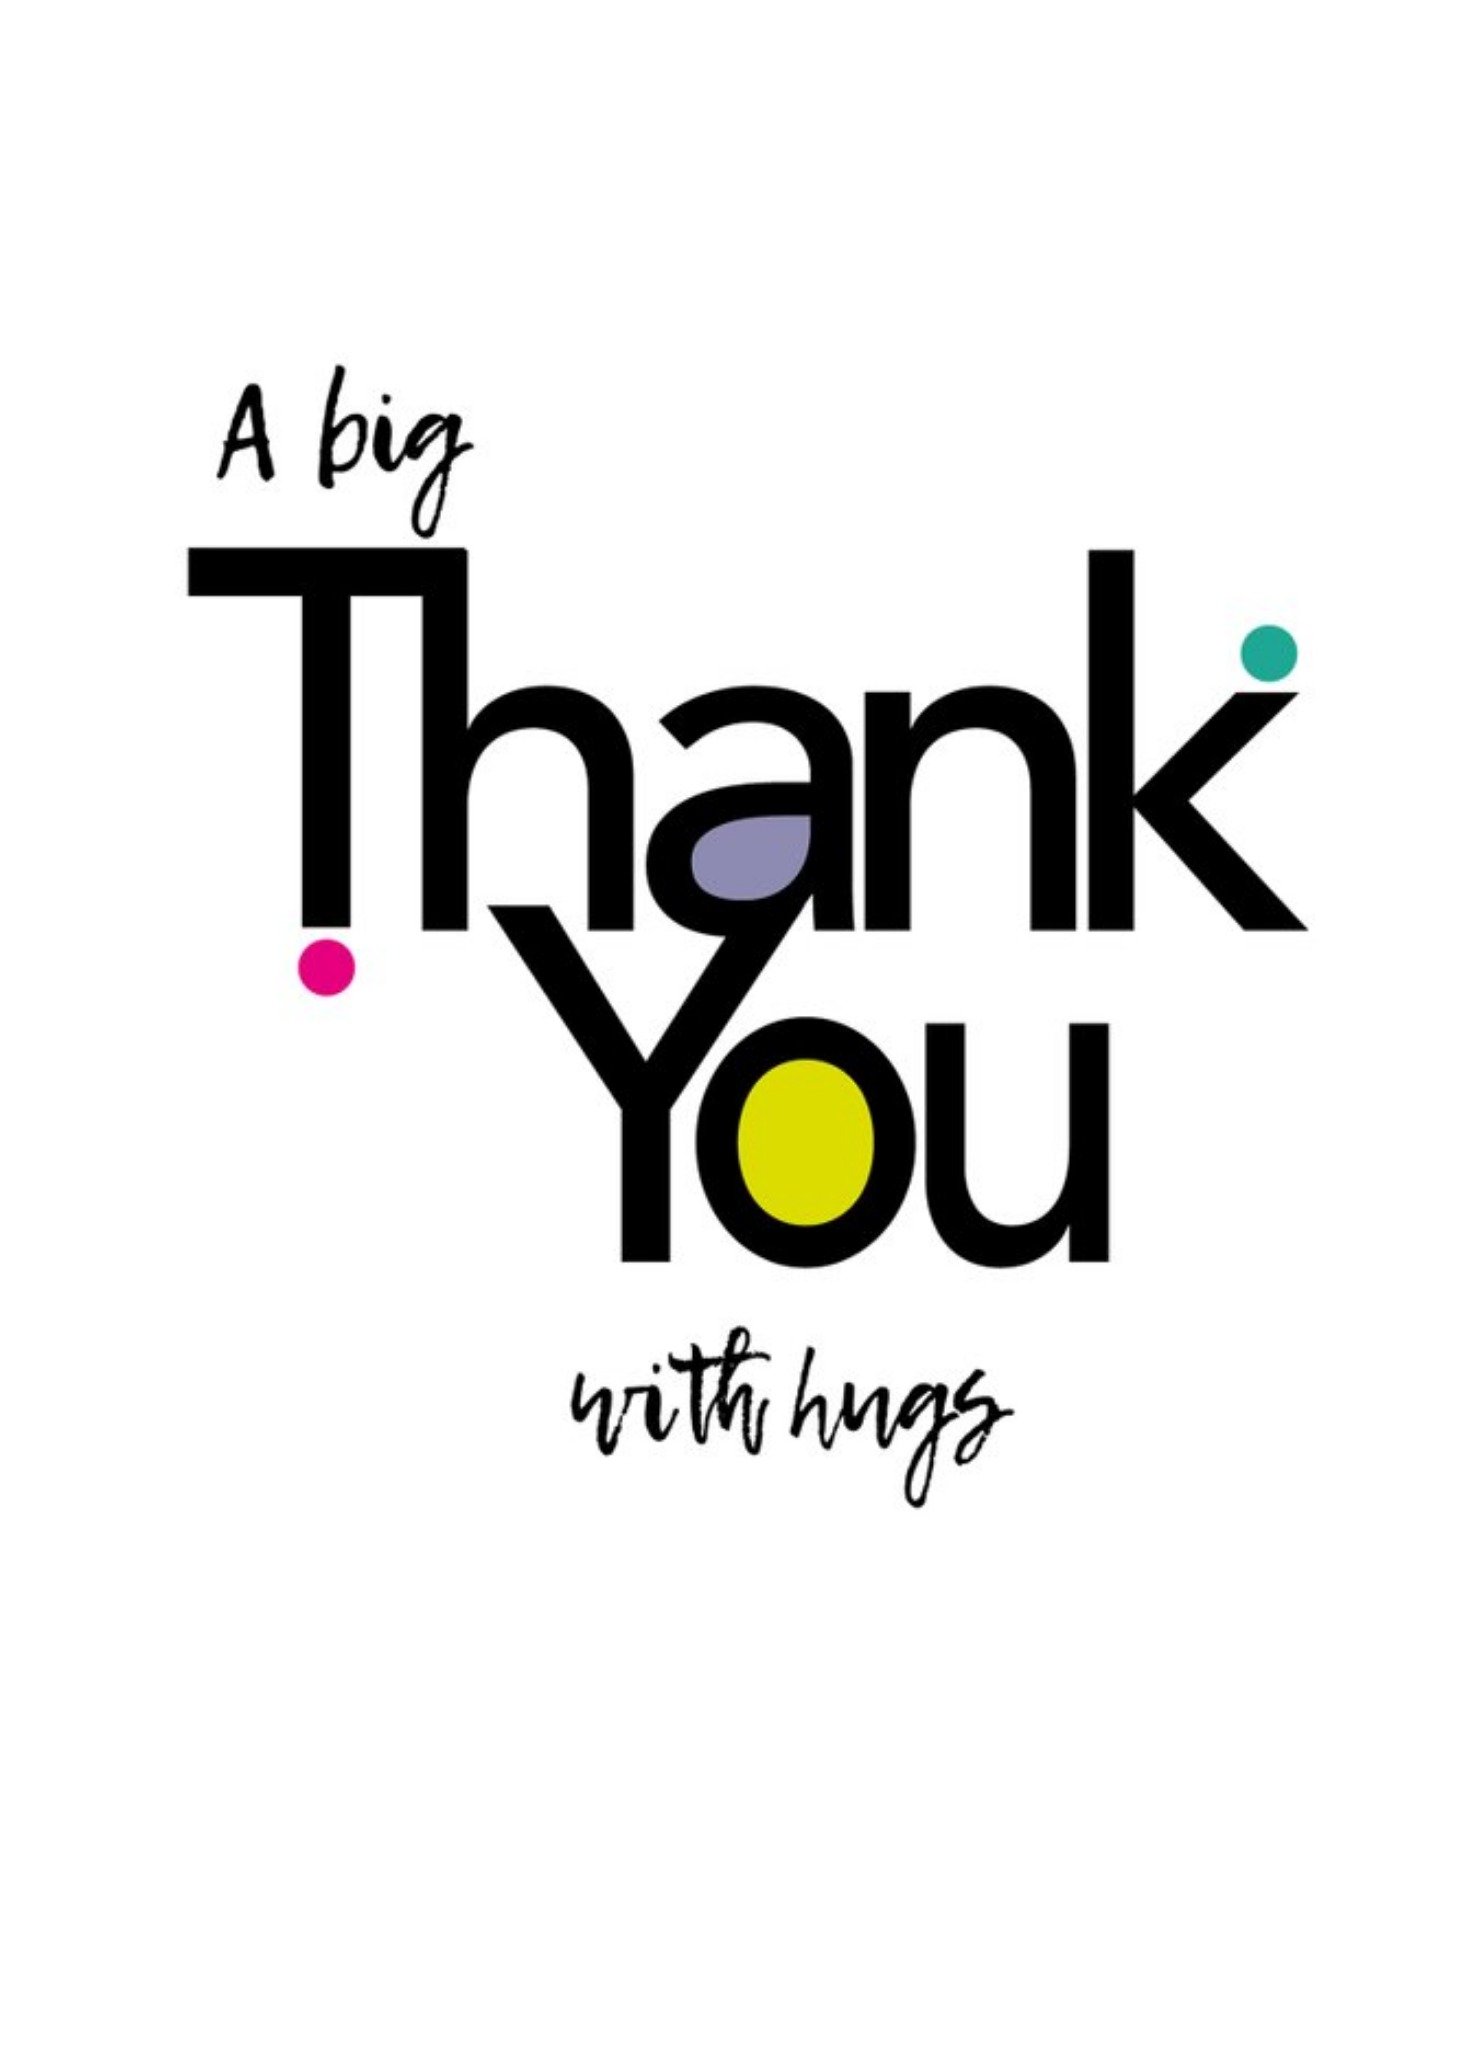 Moonpig Modern Typographic A Big Thank You With Hugs Thank You Card, Large